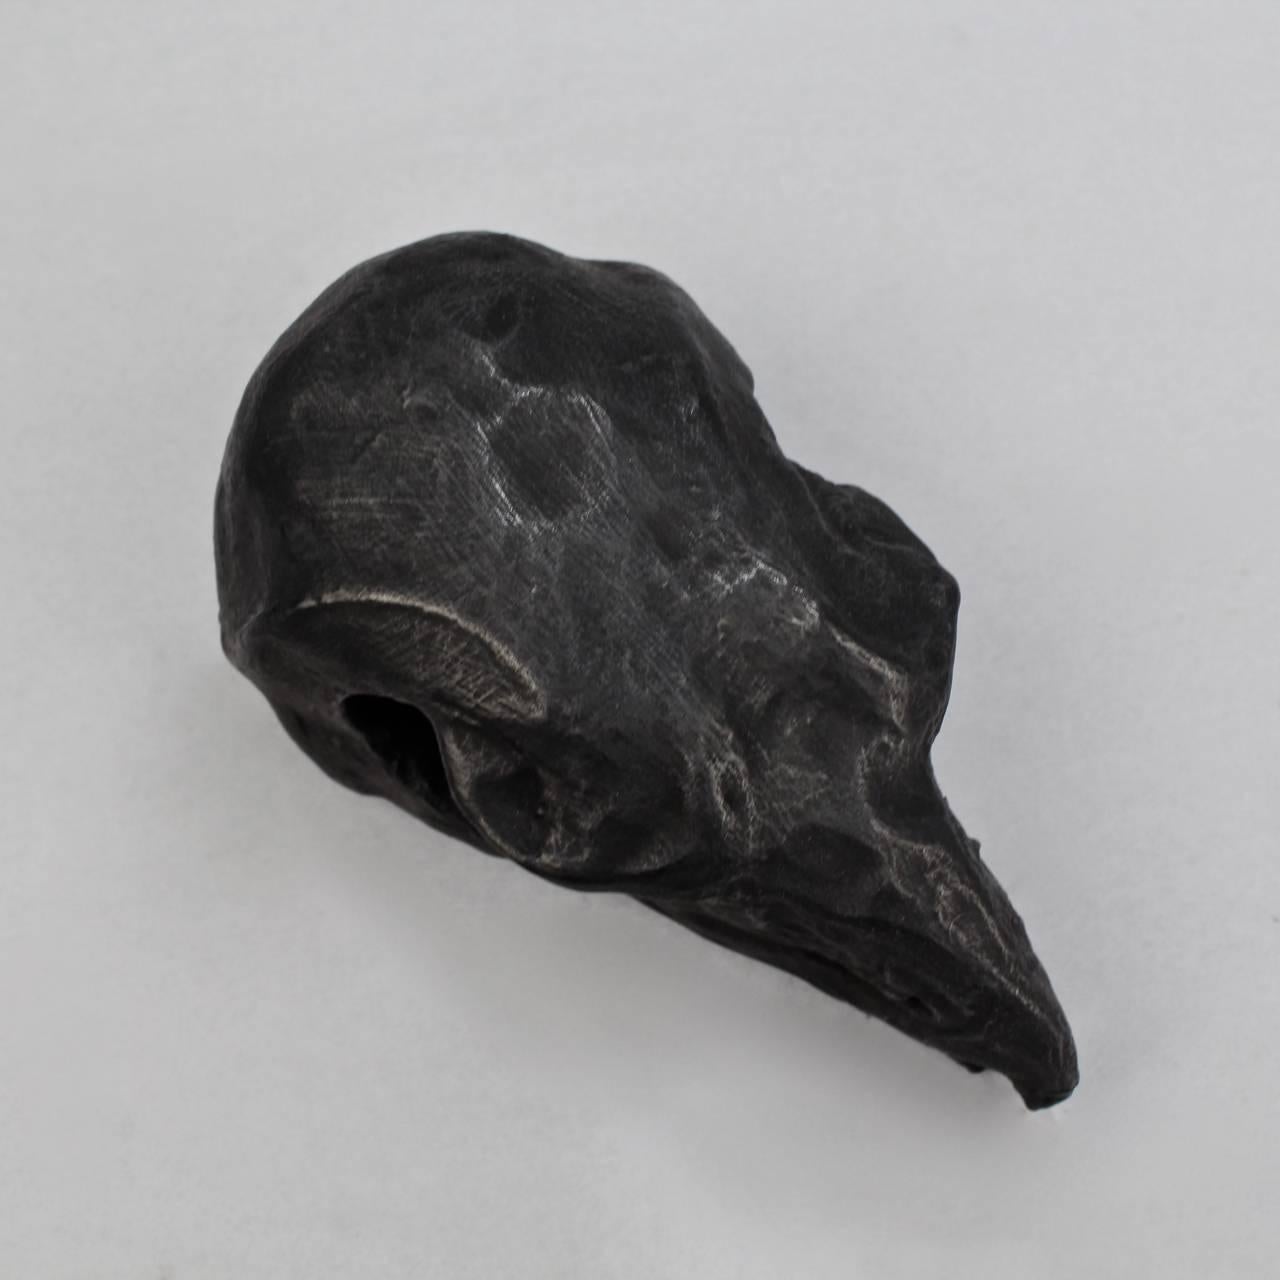 Unique Black Painted Terracotta Sculpture of a Hawk Skull by Darla Jackson, 2016 In Good Condition For Sale In Philadelphia, PA